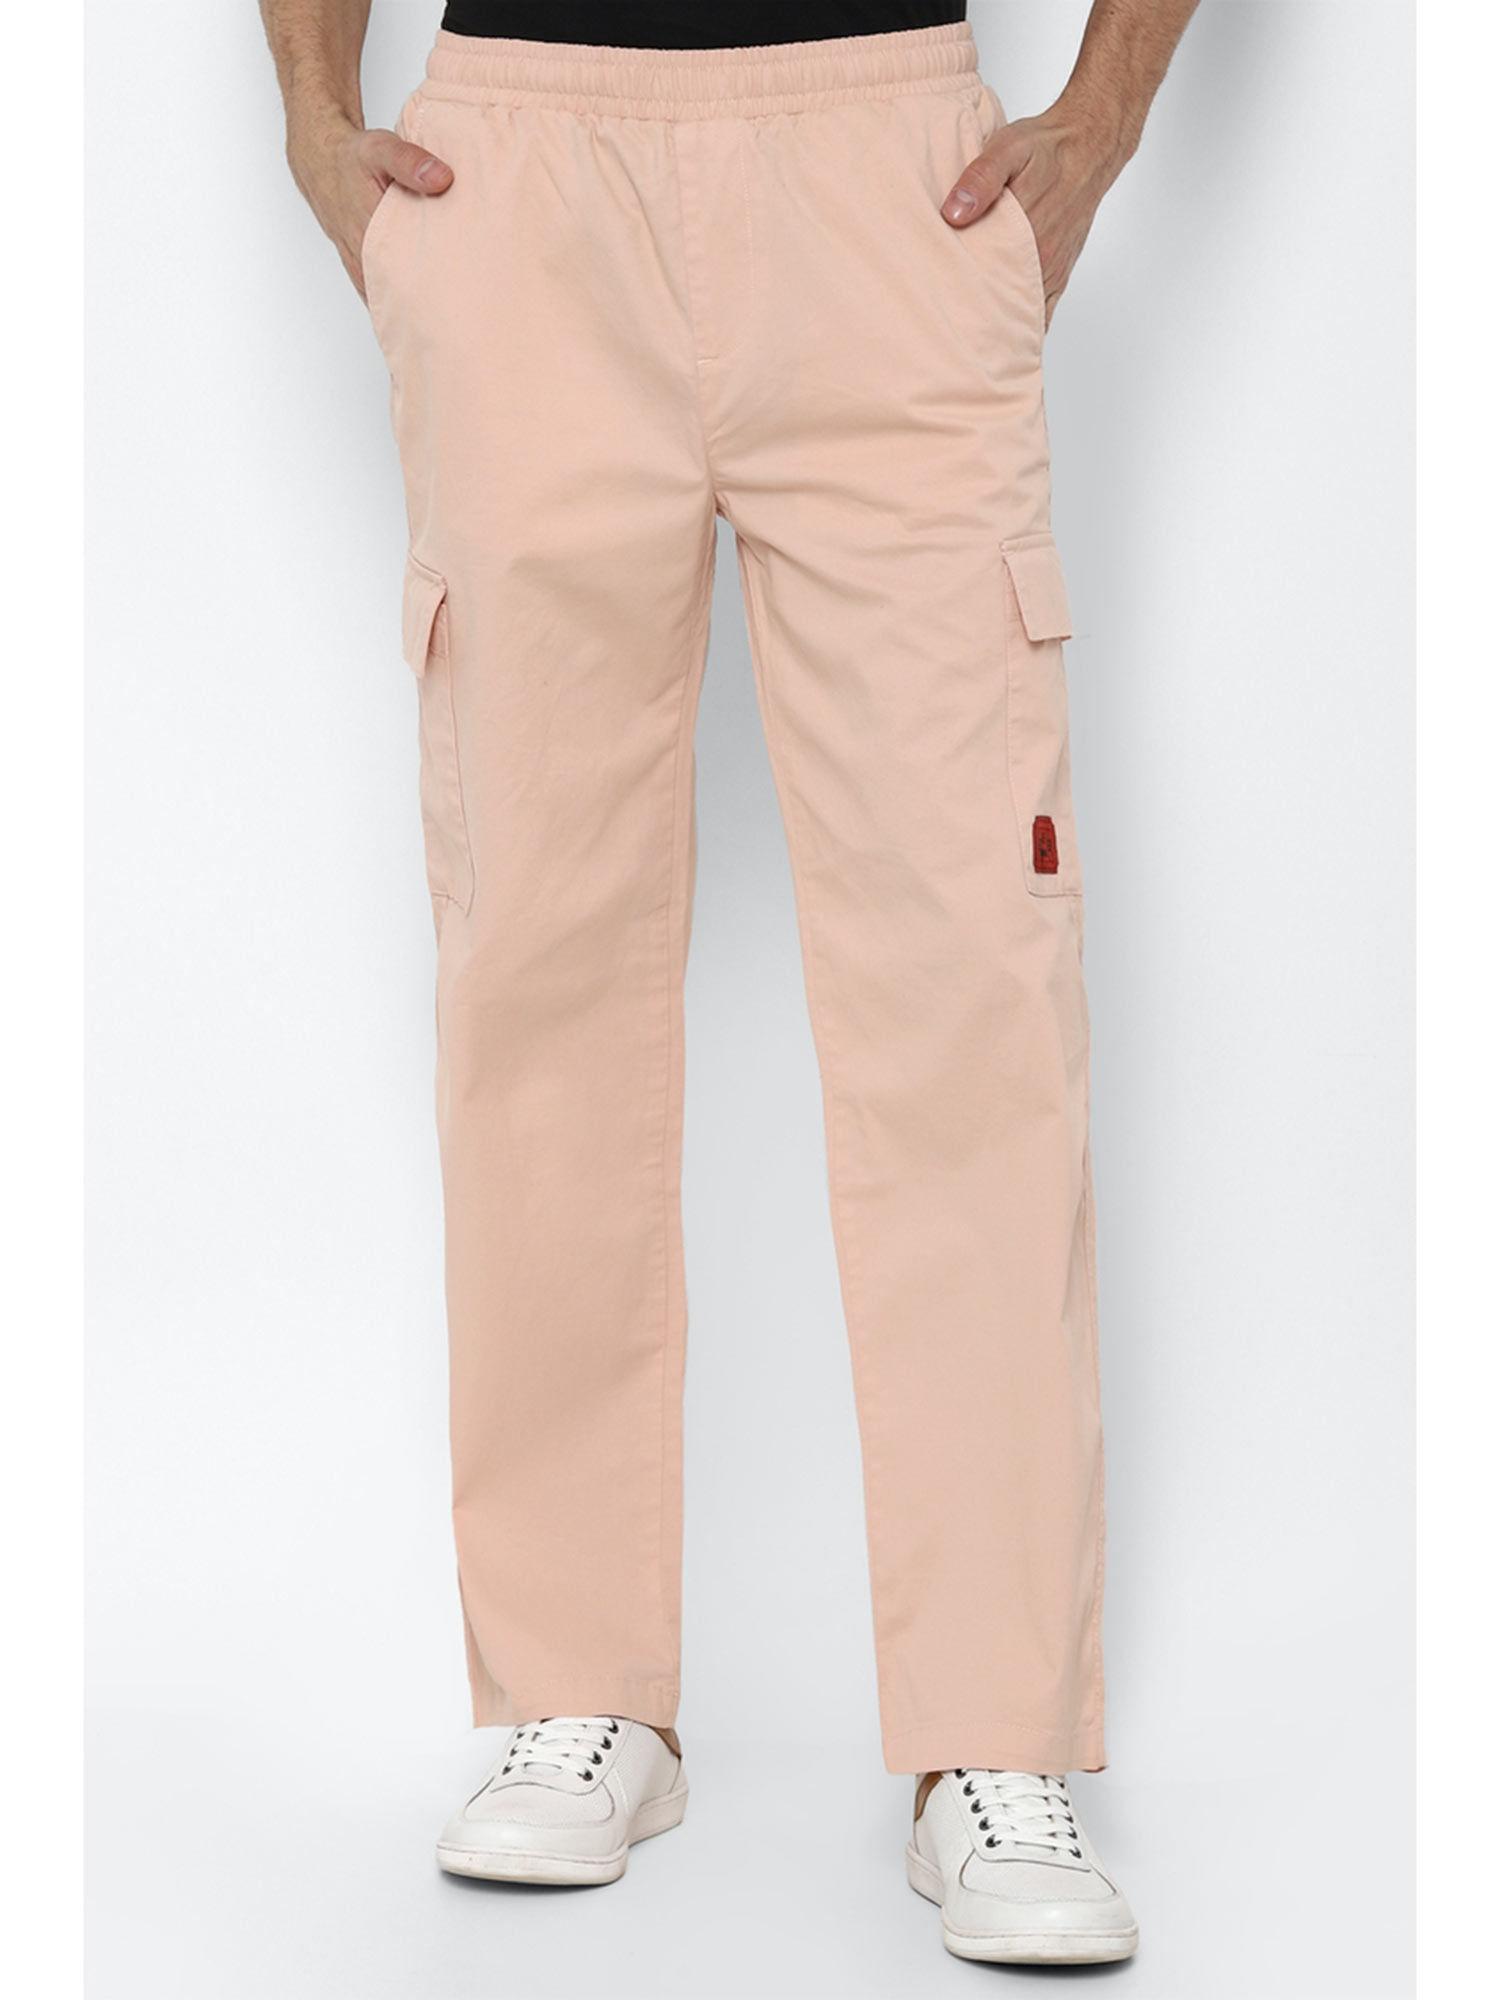 solid-pink-casual-trouser